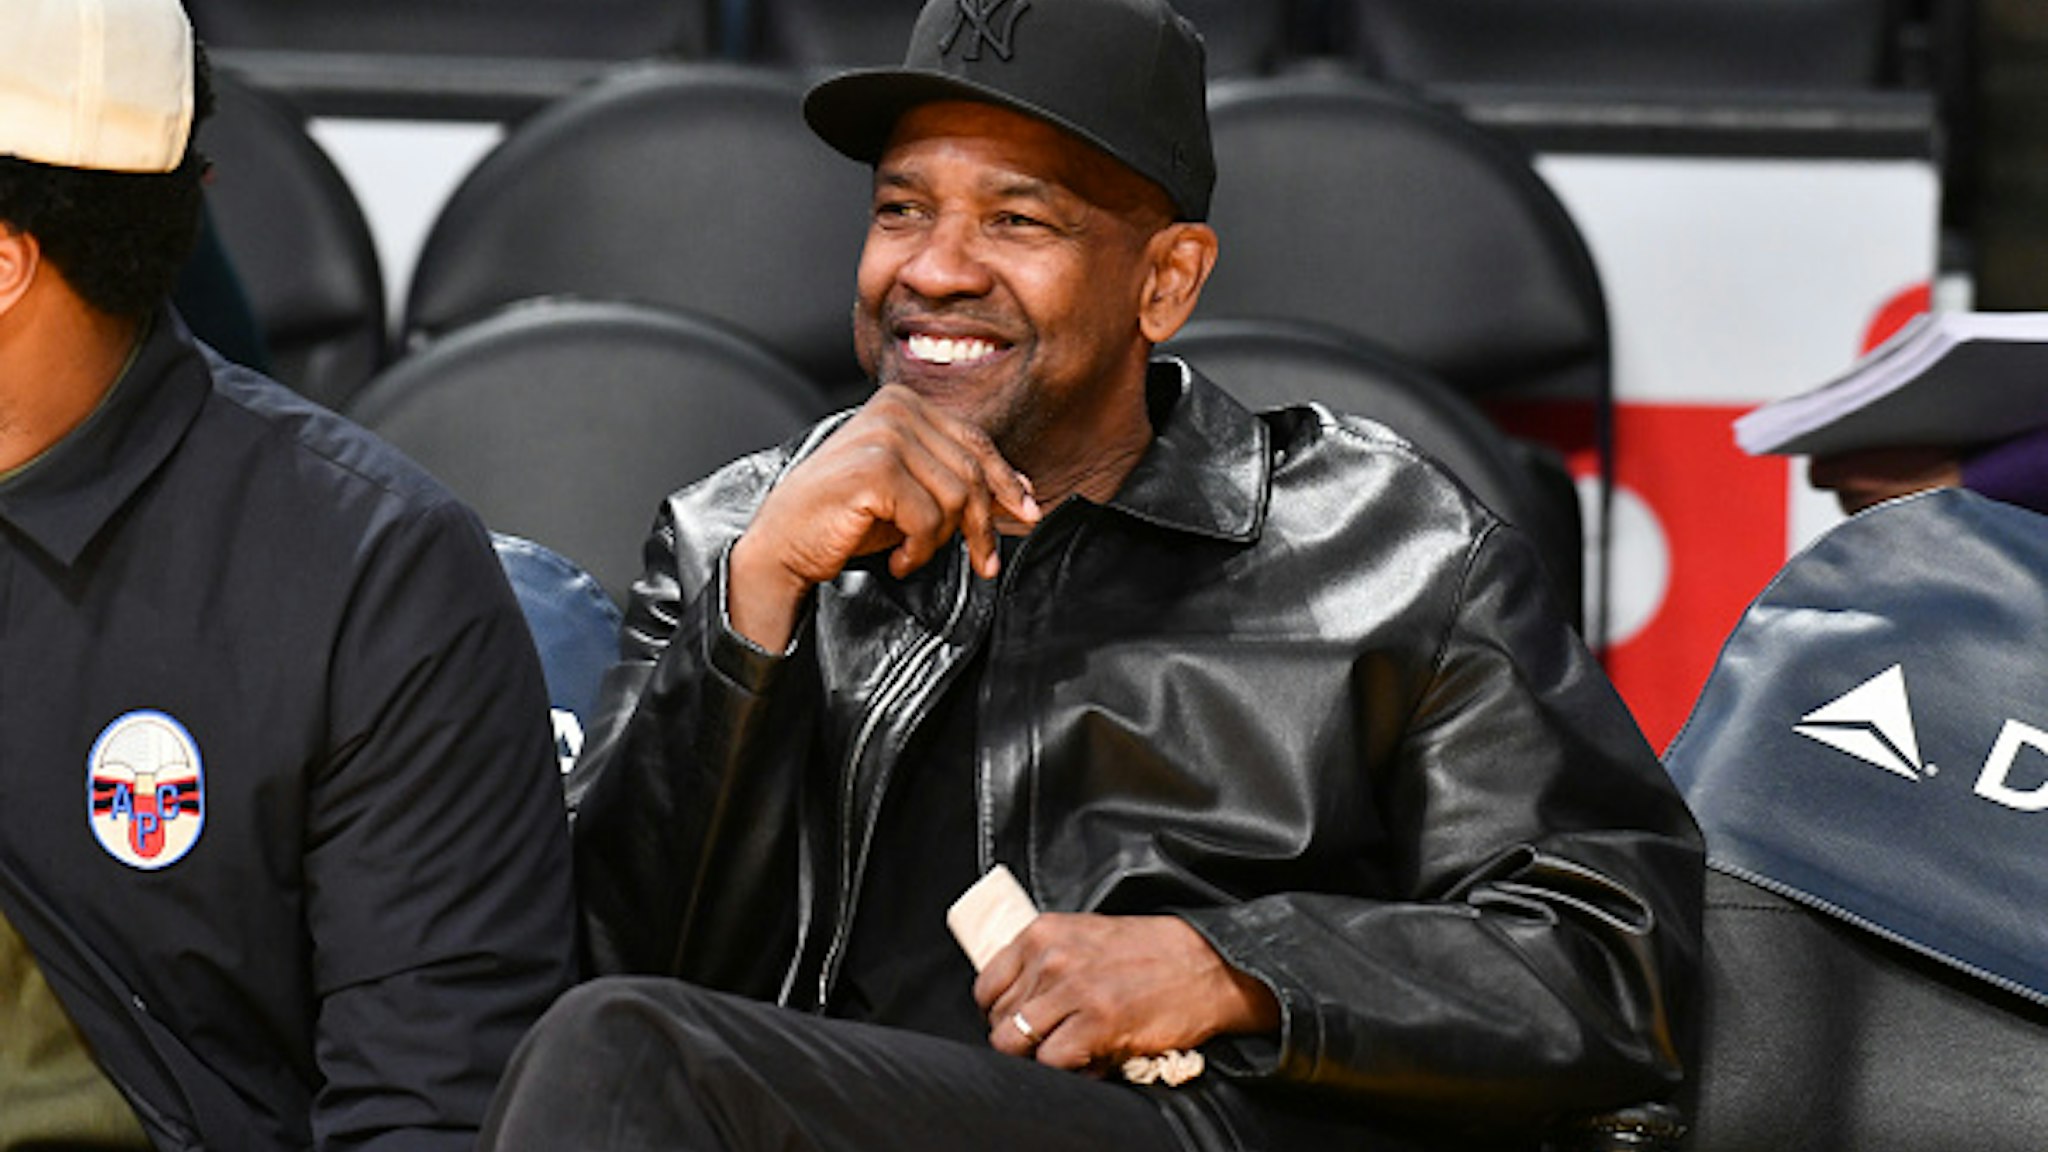 LOS ANGELES, CALIFORNIA - DECEMBER 01: Denzel Washington attends a basketball game between the Los Angeles Lakers and the Dallas Mavericks at Staples Center on December 01, 2019 in Los Angeles, California.